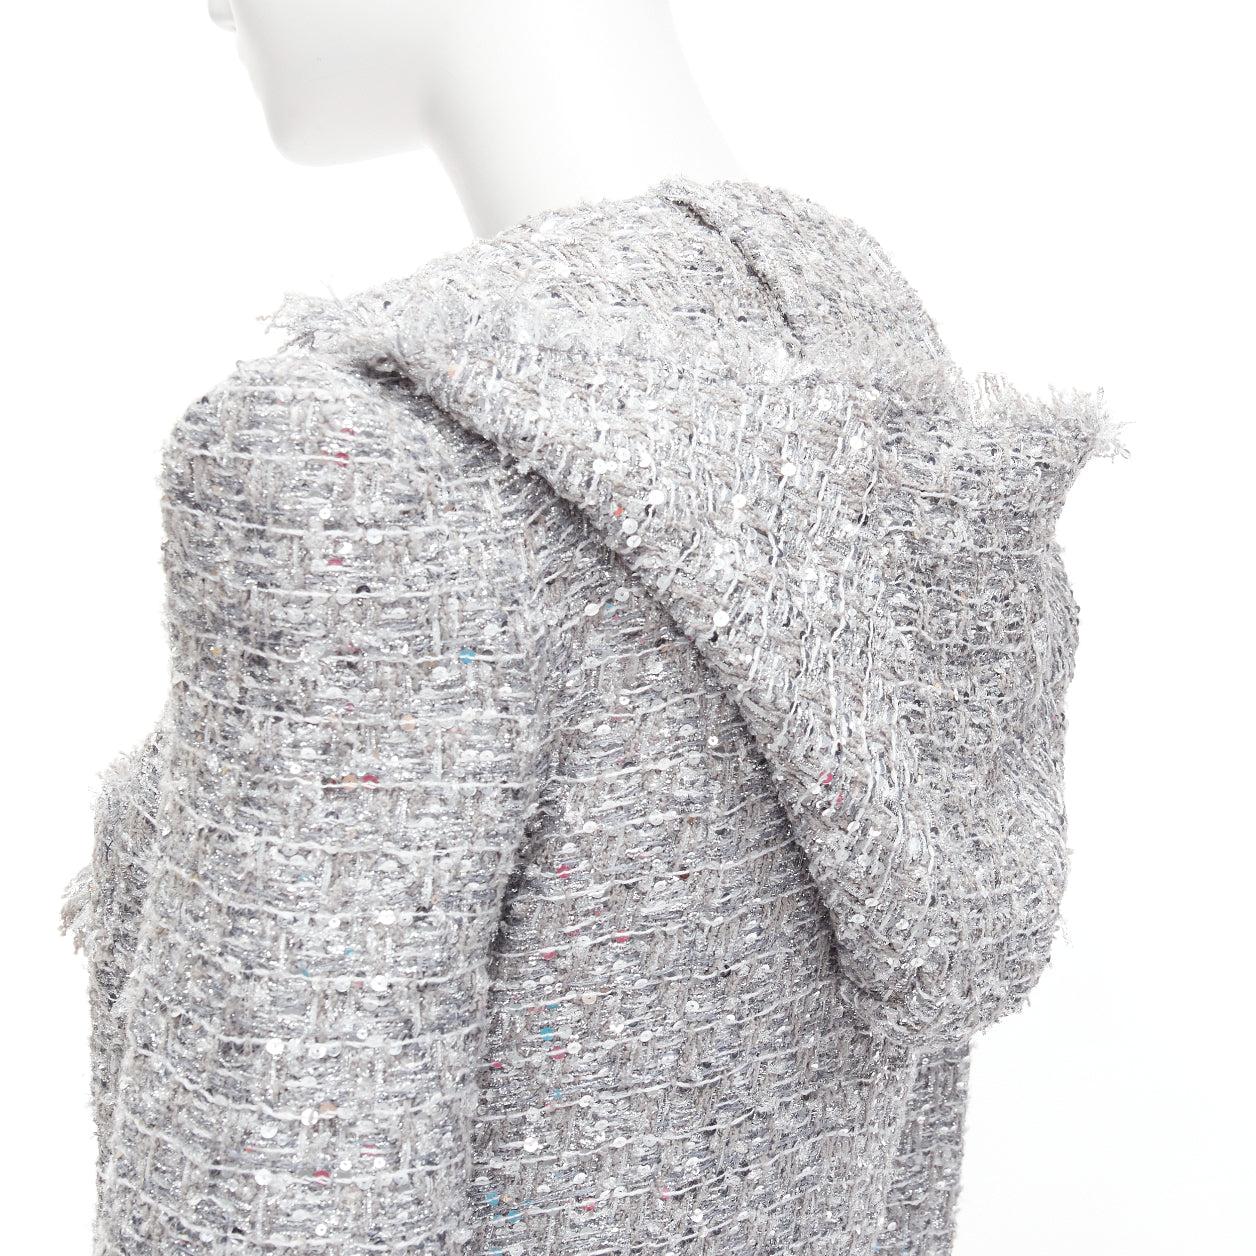 BALMAIN silver sequinned metallic boucle tweed hooded power shoulder jacket FR36 S
Reference: AAWC/A00726
Brand: Balmain
Designer: Olivier Rousteing
Collection: 2019 - Runway
Material: Polyester, Blend
Color: Silver
Pattern: Sequins
Closure: Hook &